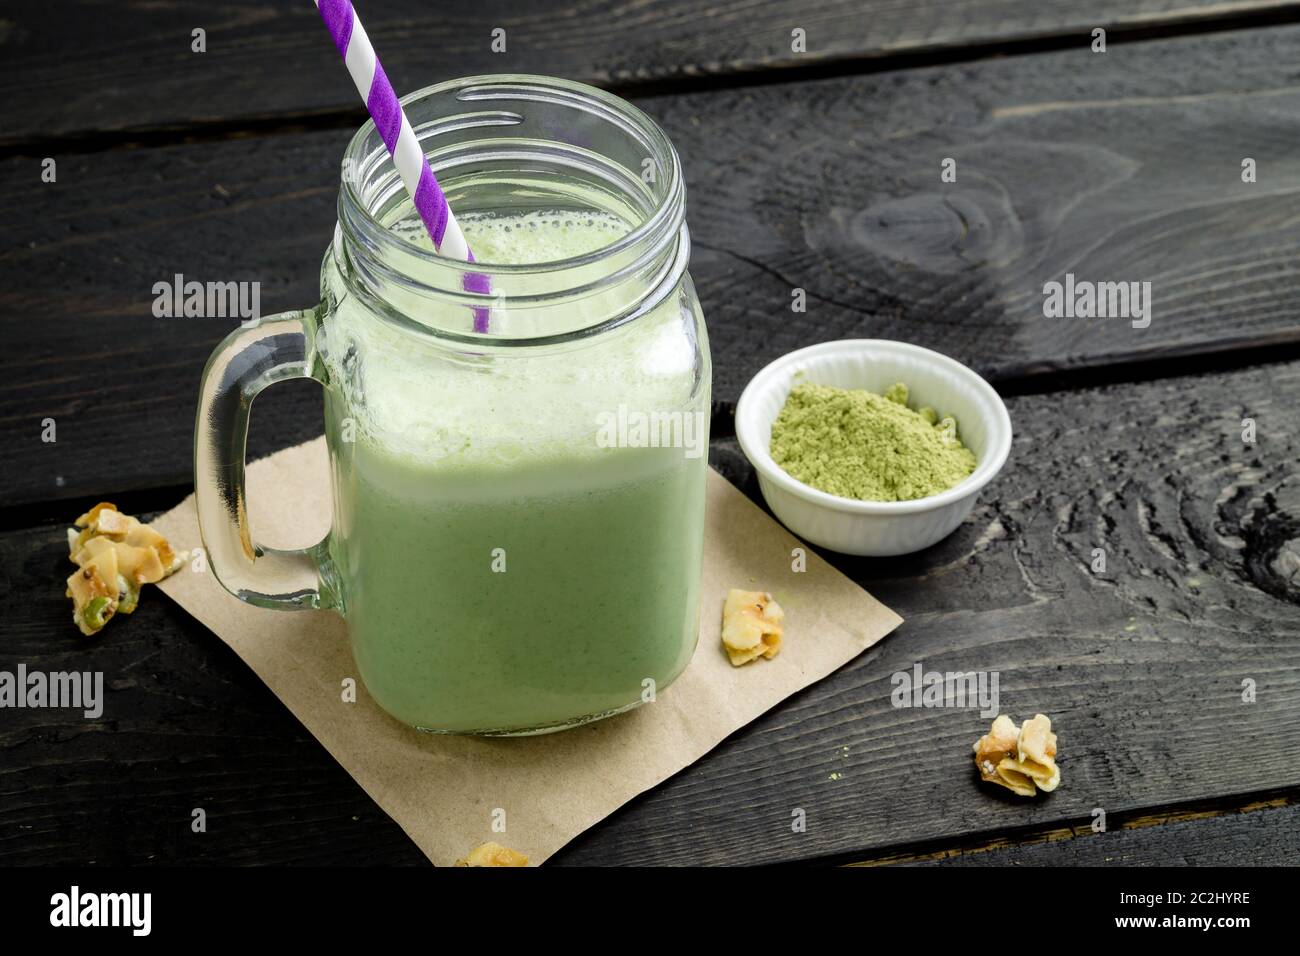 Smoothie made with powdered green tea (also known as matcha). Not only is this green smoothie delicious, it's also packed with antioxidants. Stock Photo